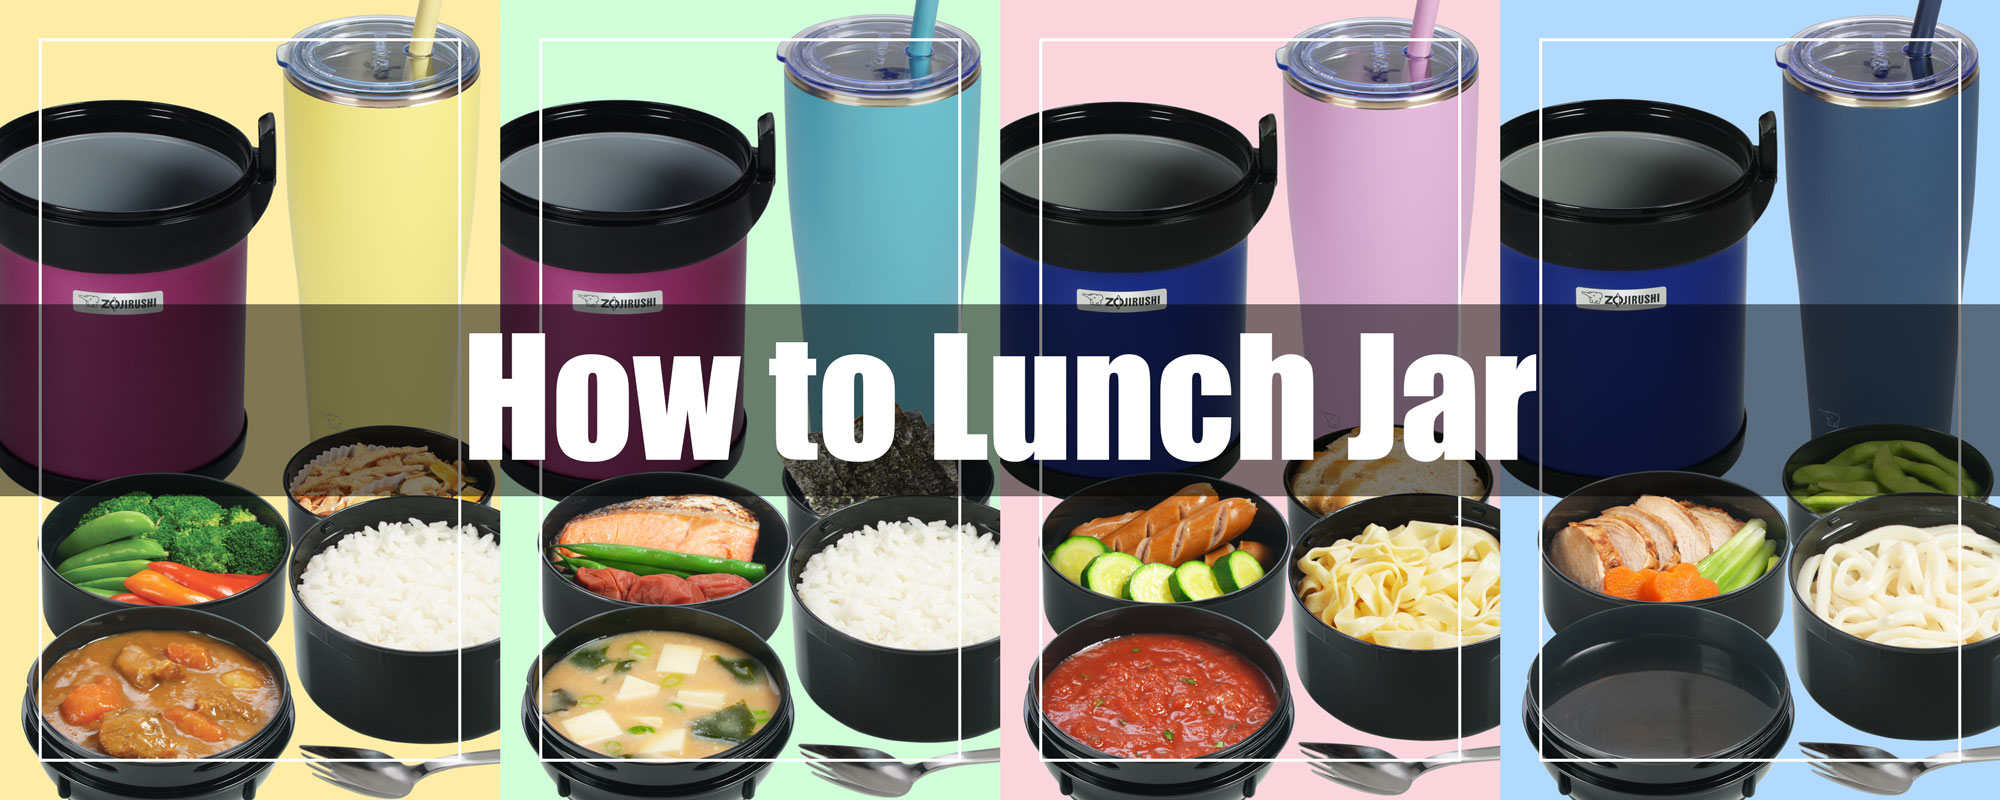 How to Lunch Jar